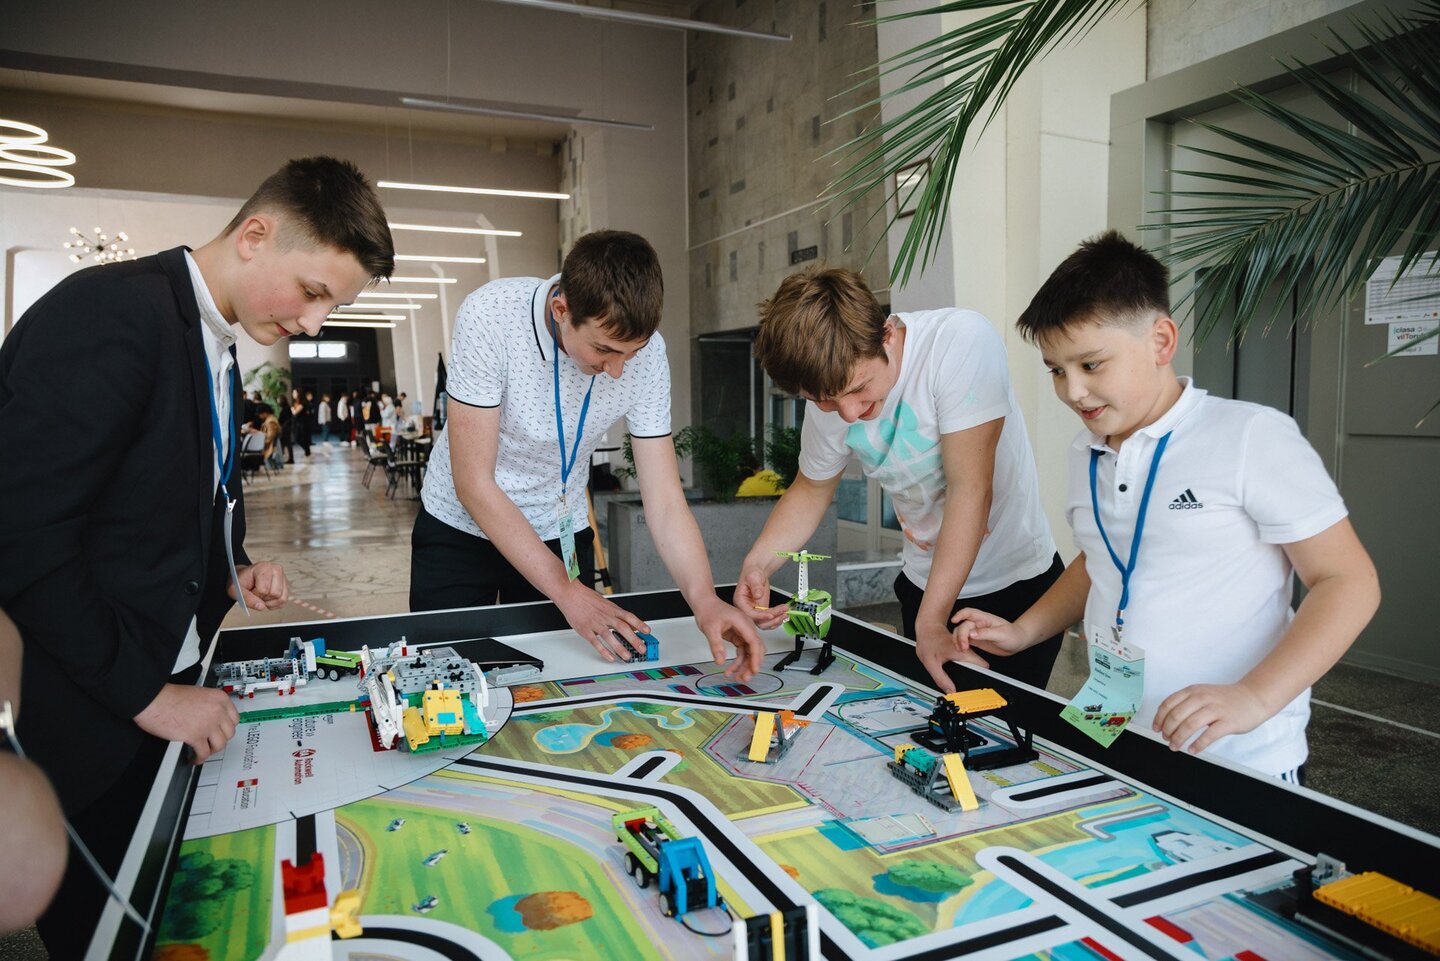 Group of Lego League participants working together